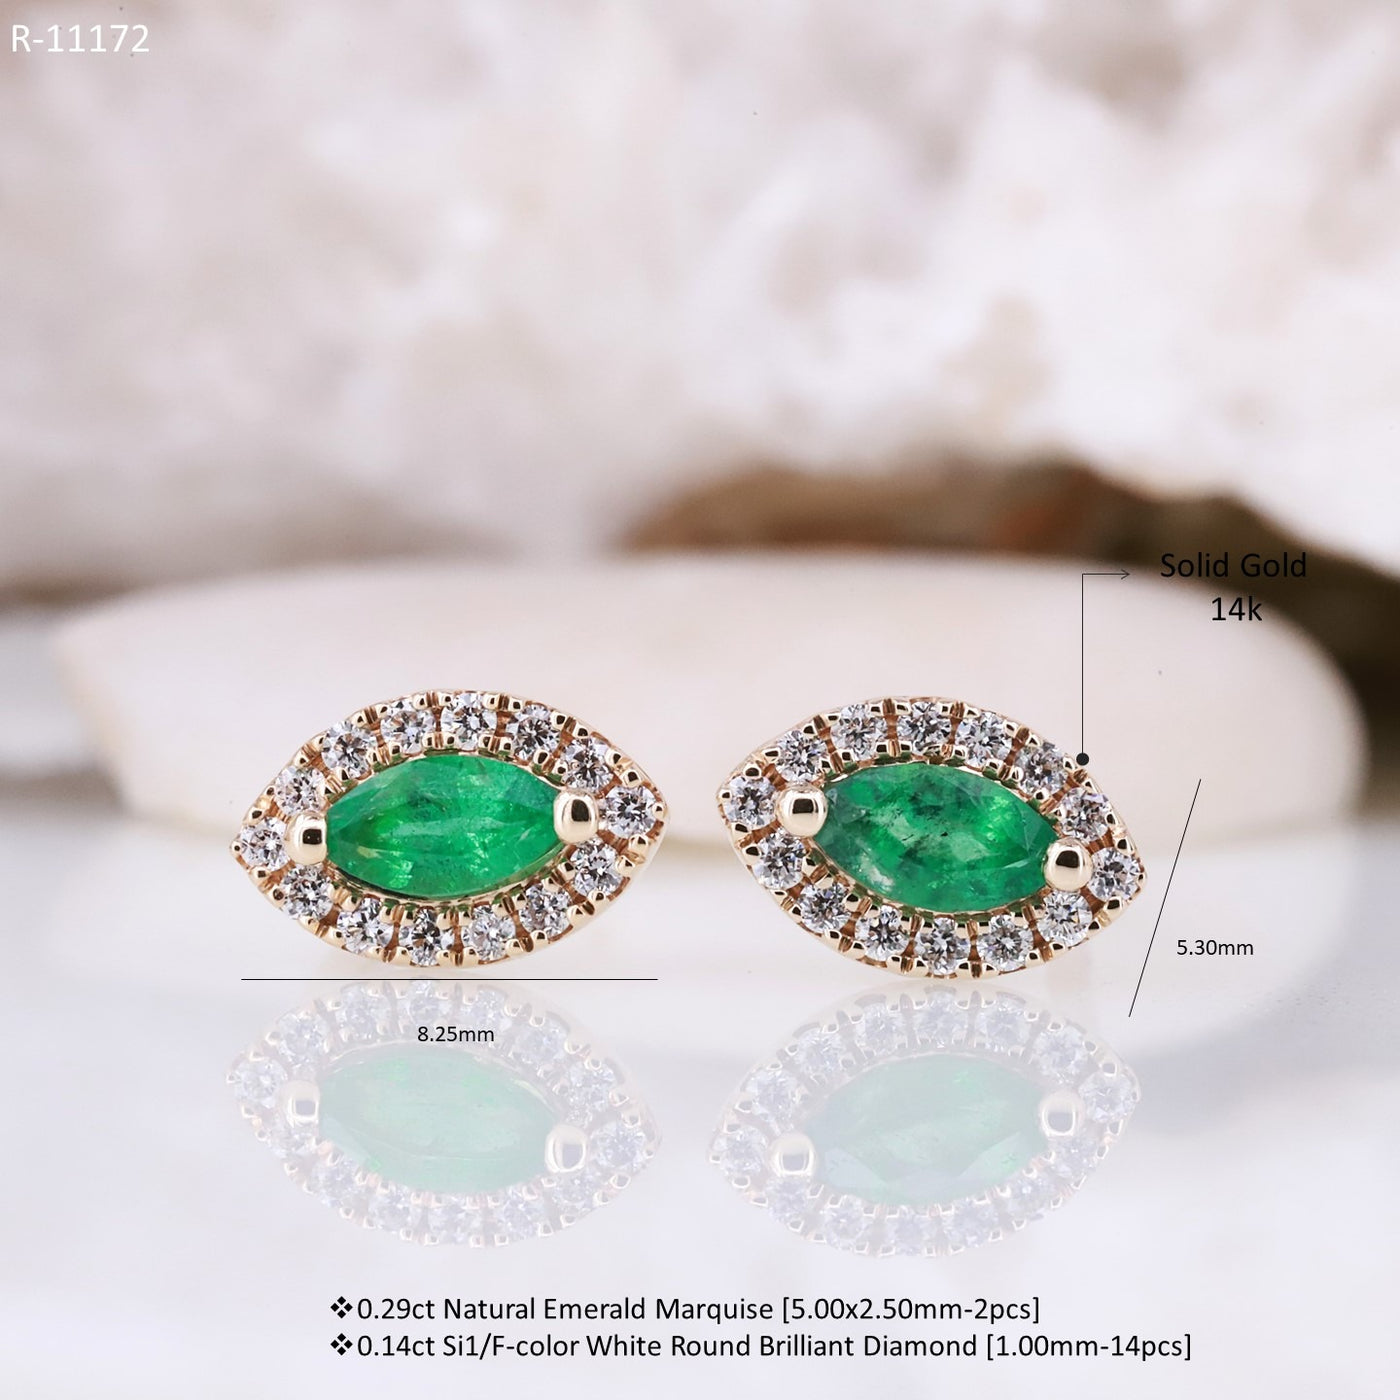 Sparkle in Style with Our Emerald Marquise Diamond Earrings - Shop Now for Timeless Elegance and Unmatched Beauty! Emerald Marquise Diamond